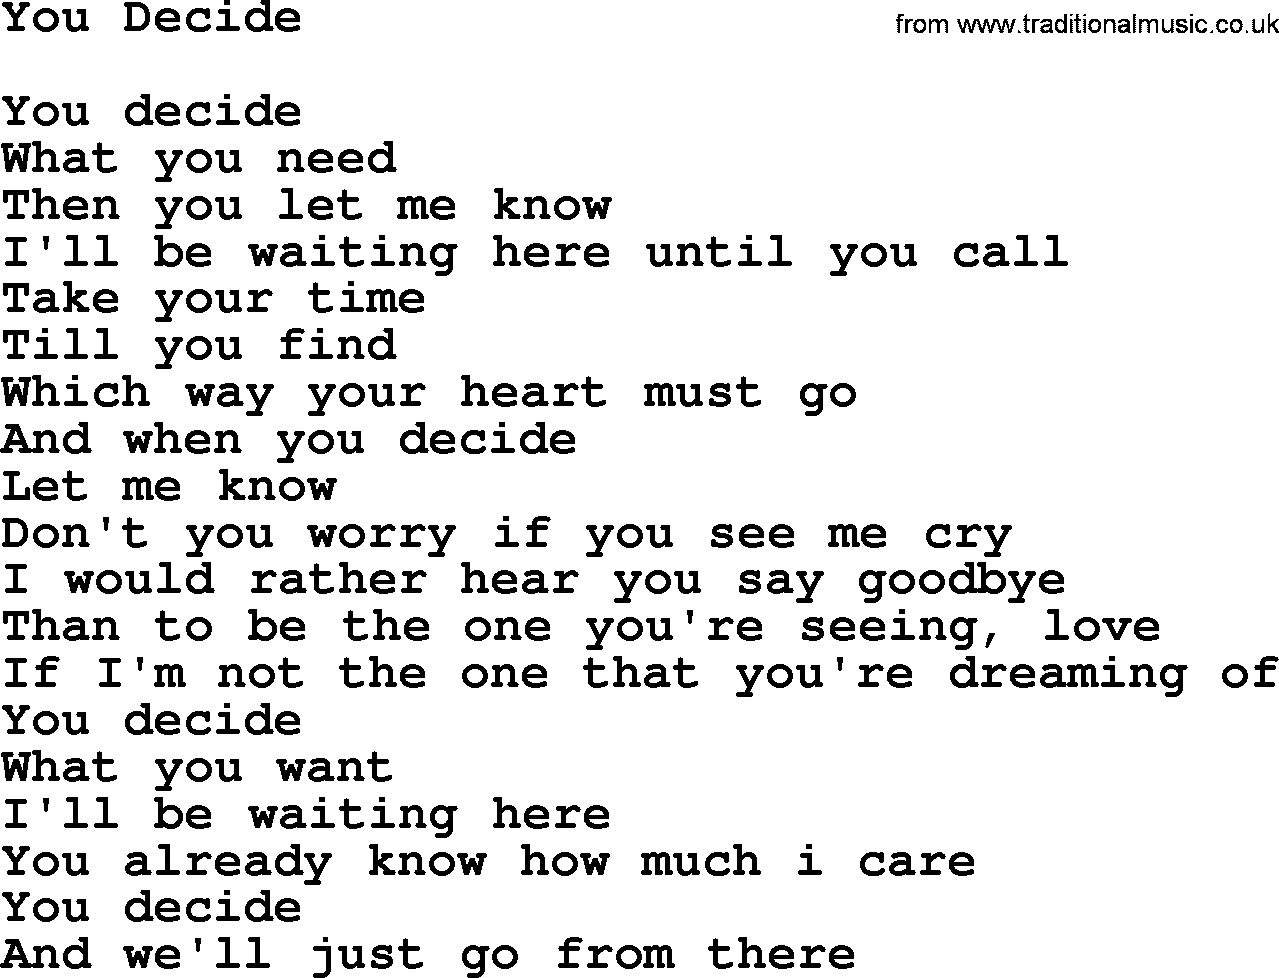 Willie Nelson song: You Decide lyrics